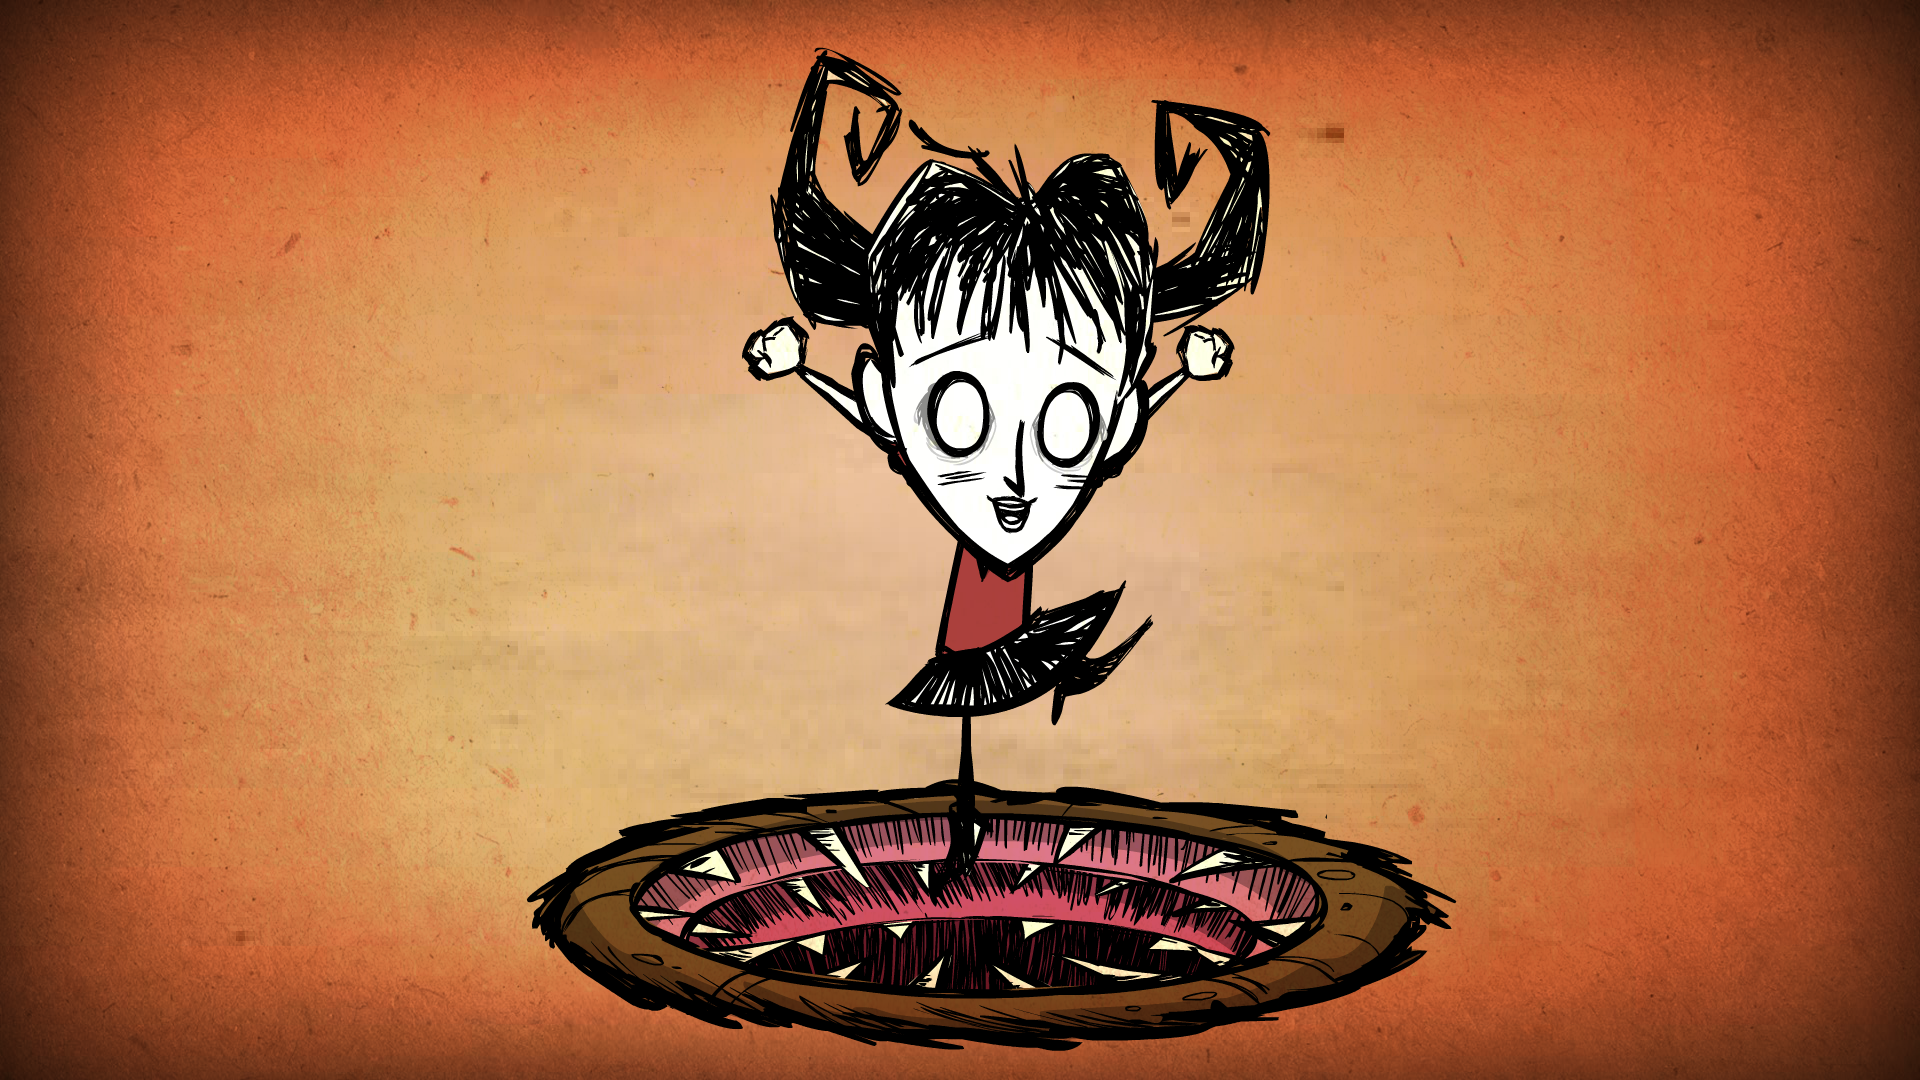 Taches dont. Уиллоу DST. Уиллоу донт старв. Don't Starve together червоточина. Уиллоу don't Starve together.